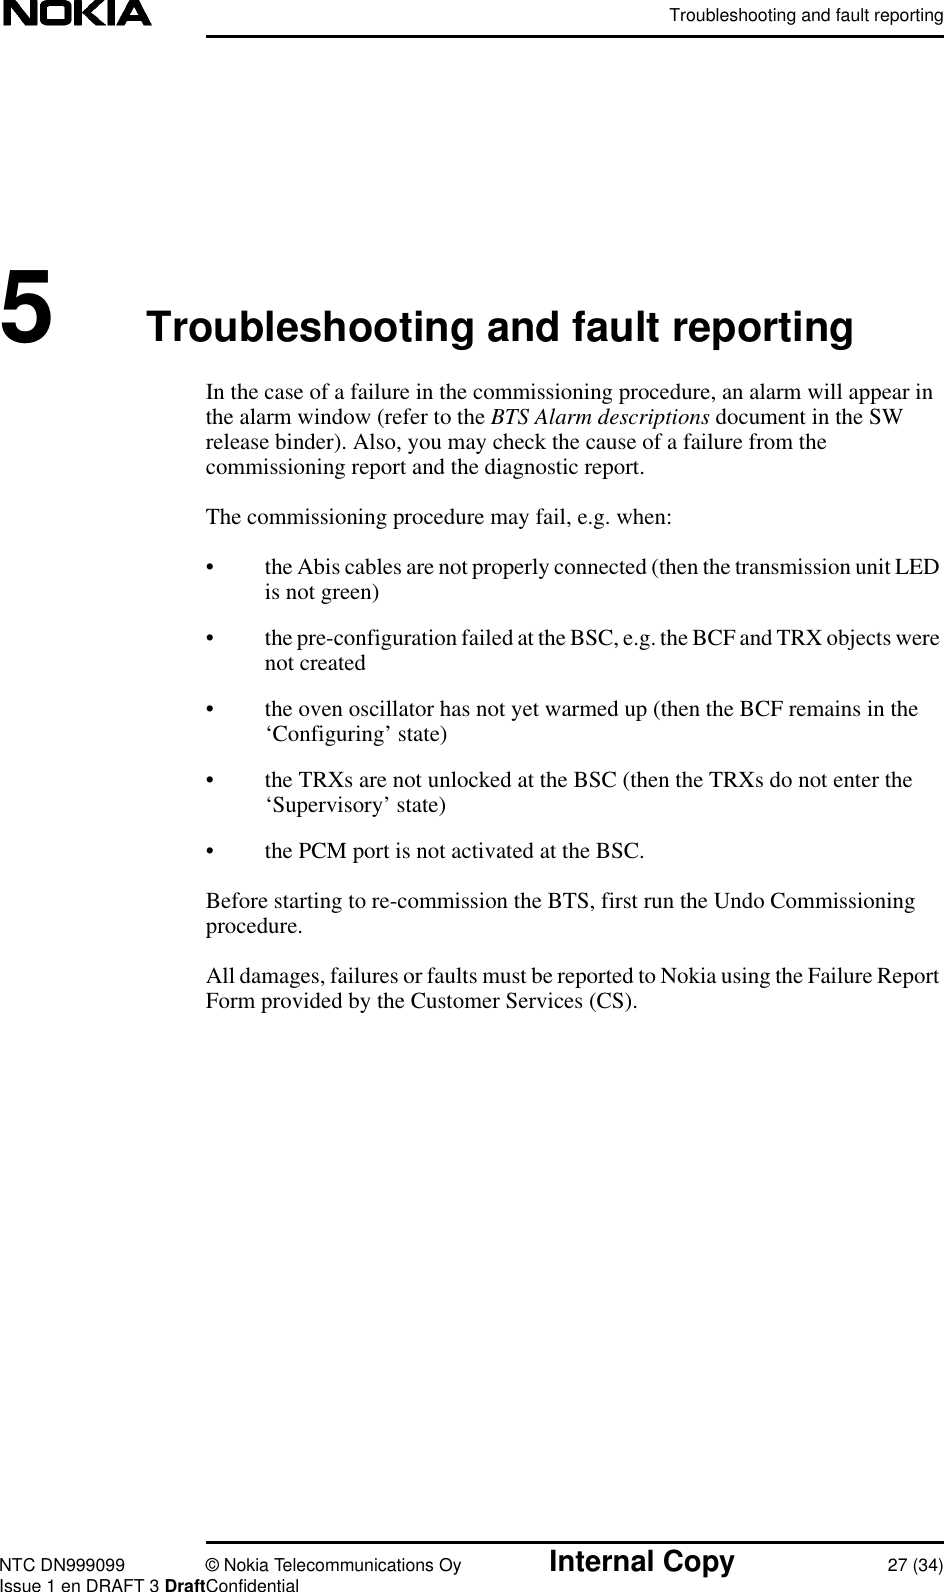 Troubleshooting and fault reportingNTC DN999099 © Nokia Telecommunications Oy Internal Copy 27 (34)Issue 1 en DRAFT 3 DraftConfidential5Troubleshooting and fault reportingIn the case of a failure in the commissioning procedure, an alarm will appear inthe alarm window (refer to the BTS Alarm descriptions document in the SWrelease binder). Also, you may check the cause of a failure from thecommissioning report and the diagnostic report.The commissioning procedure may fail, e.g. when:• the Abis cables are not properly connected (then the transmission unit LEDis not green)• the pre-configuration failed at the BSC, e.g. the BCF and TRX objects werenot created• the oven oscillator has not yet warmed up (then the BCF remains in the‘Configuring’ state)• the TRXs are not unlocked at the BSC (then the TRXs do not enter the‘Supervisory’ state)• the PCM port is not activated at the BSC.Before starting to re-commission the BTS, first run the Undo Commissioningprocedure.All damages, failures or faults must be reported to Nokia using the Failure ReportForm provided by the Customer Services (CS).